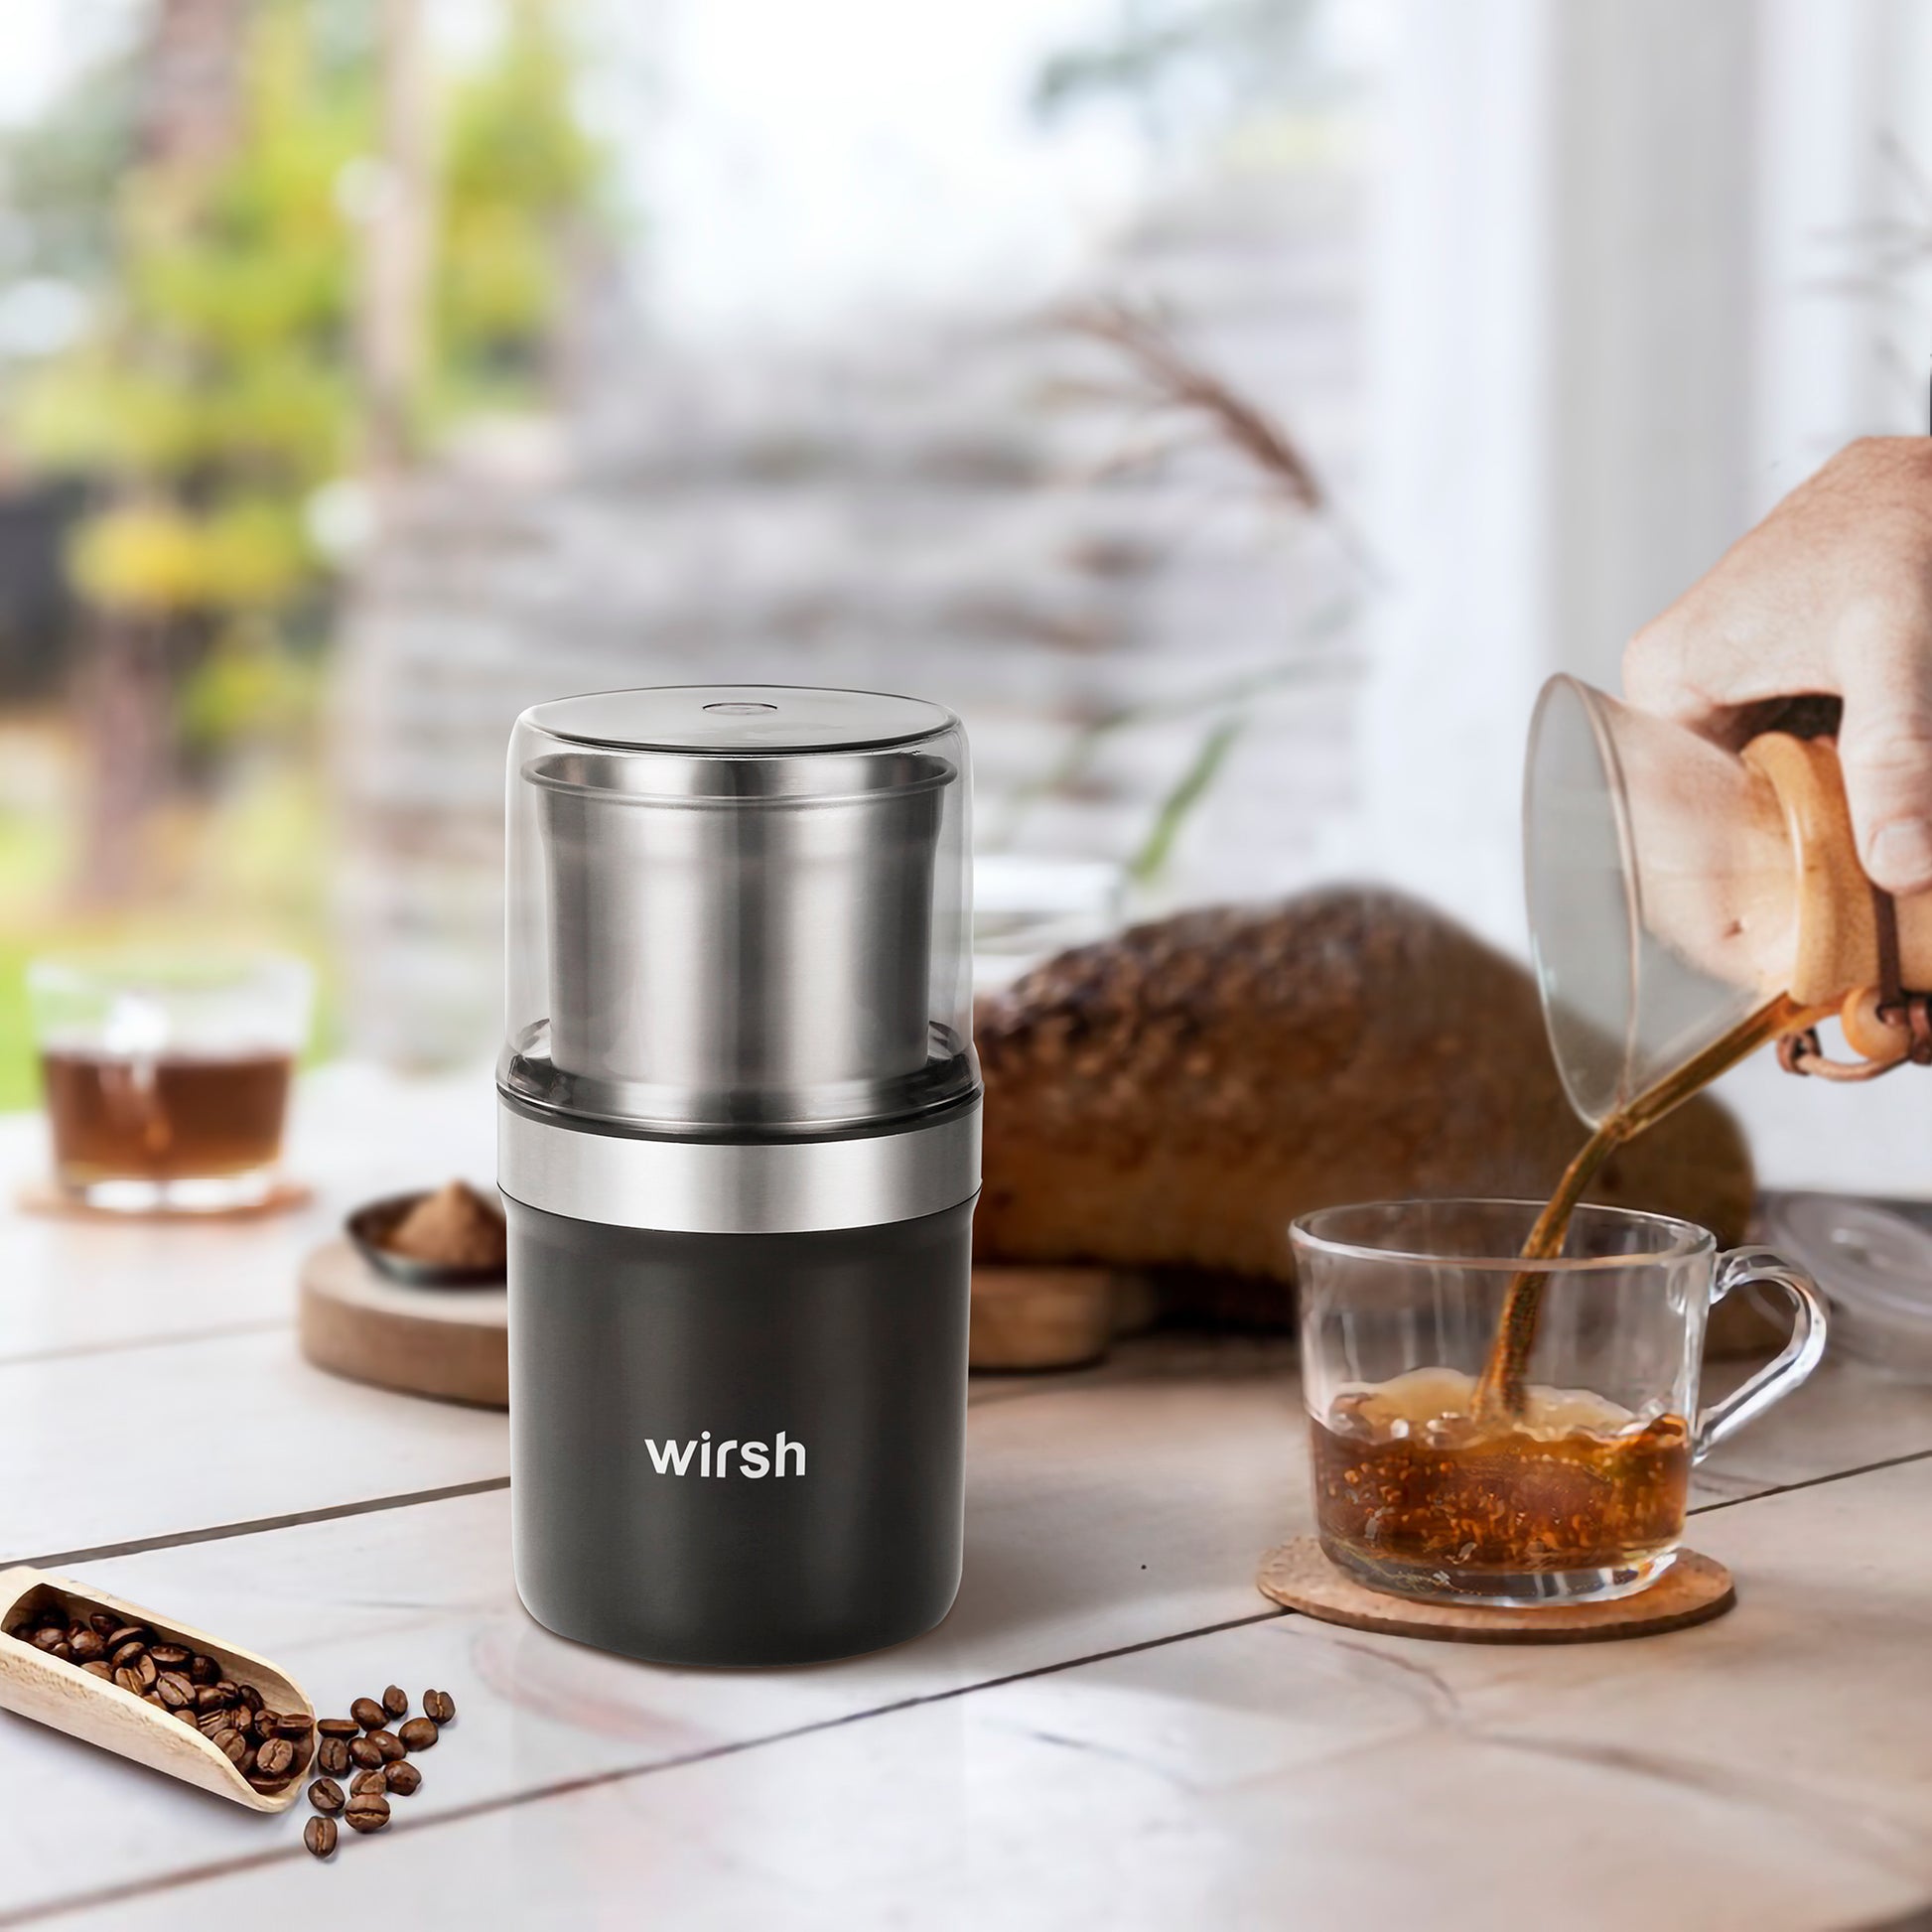 Herb Grinder-Wirsh Electric Spice Grinder with 5.3oz. Stainless Steel  Removable Bowl,Coffee Grinder with 200W Motor for Herbs,Spices,Coffee